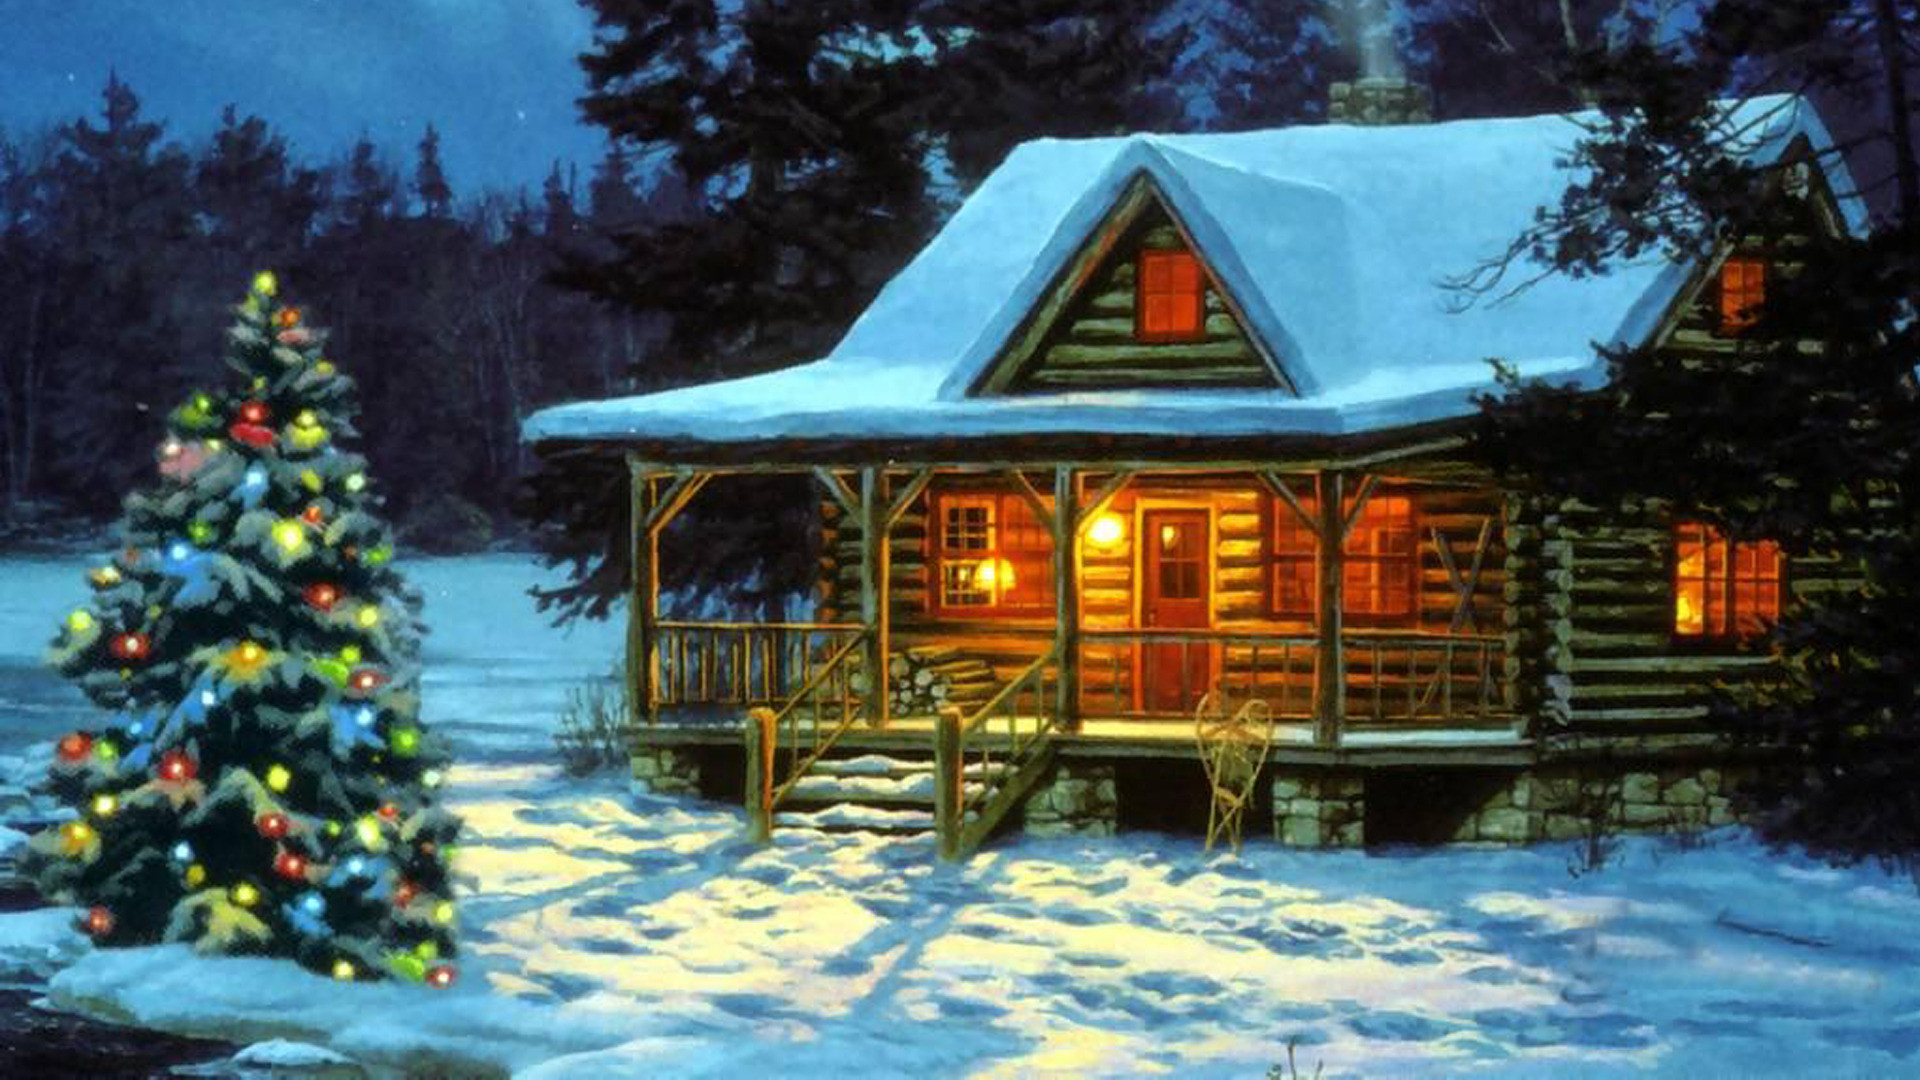 Christmas Cabin In The Woods- WallpaperUse